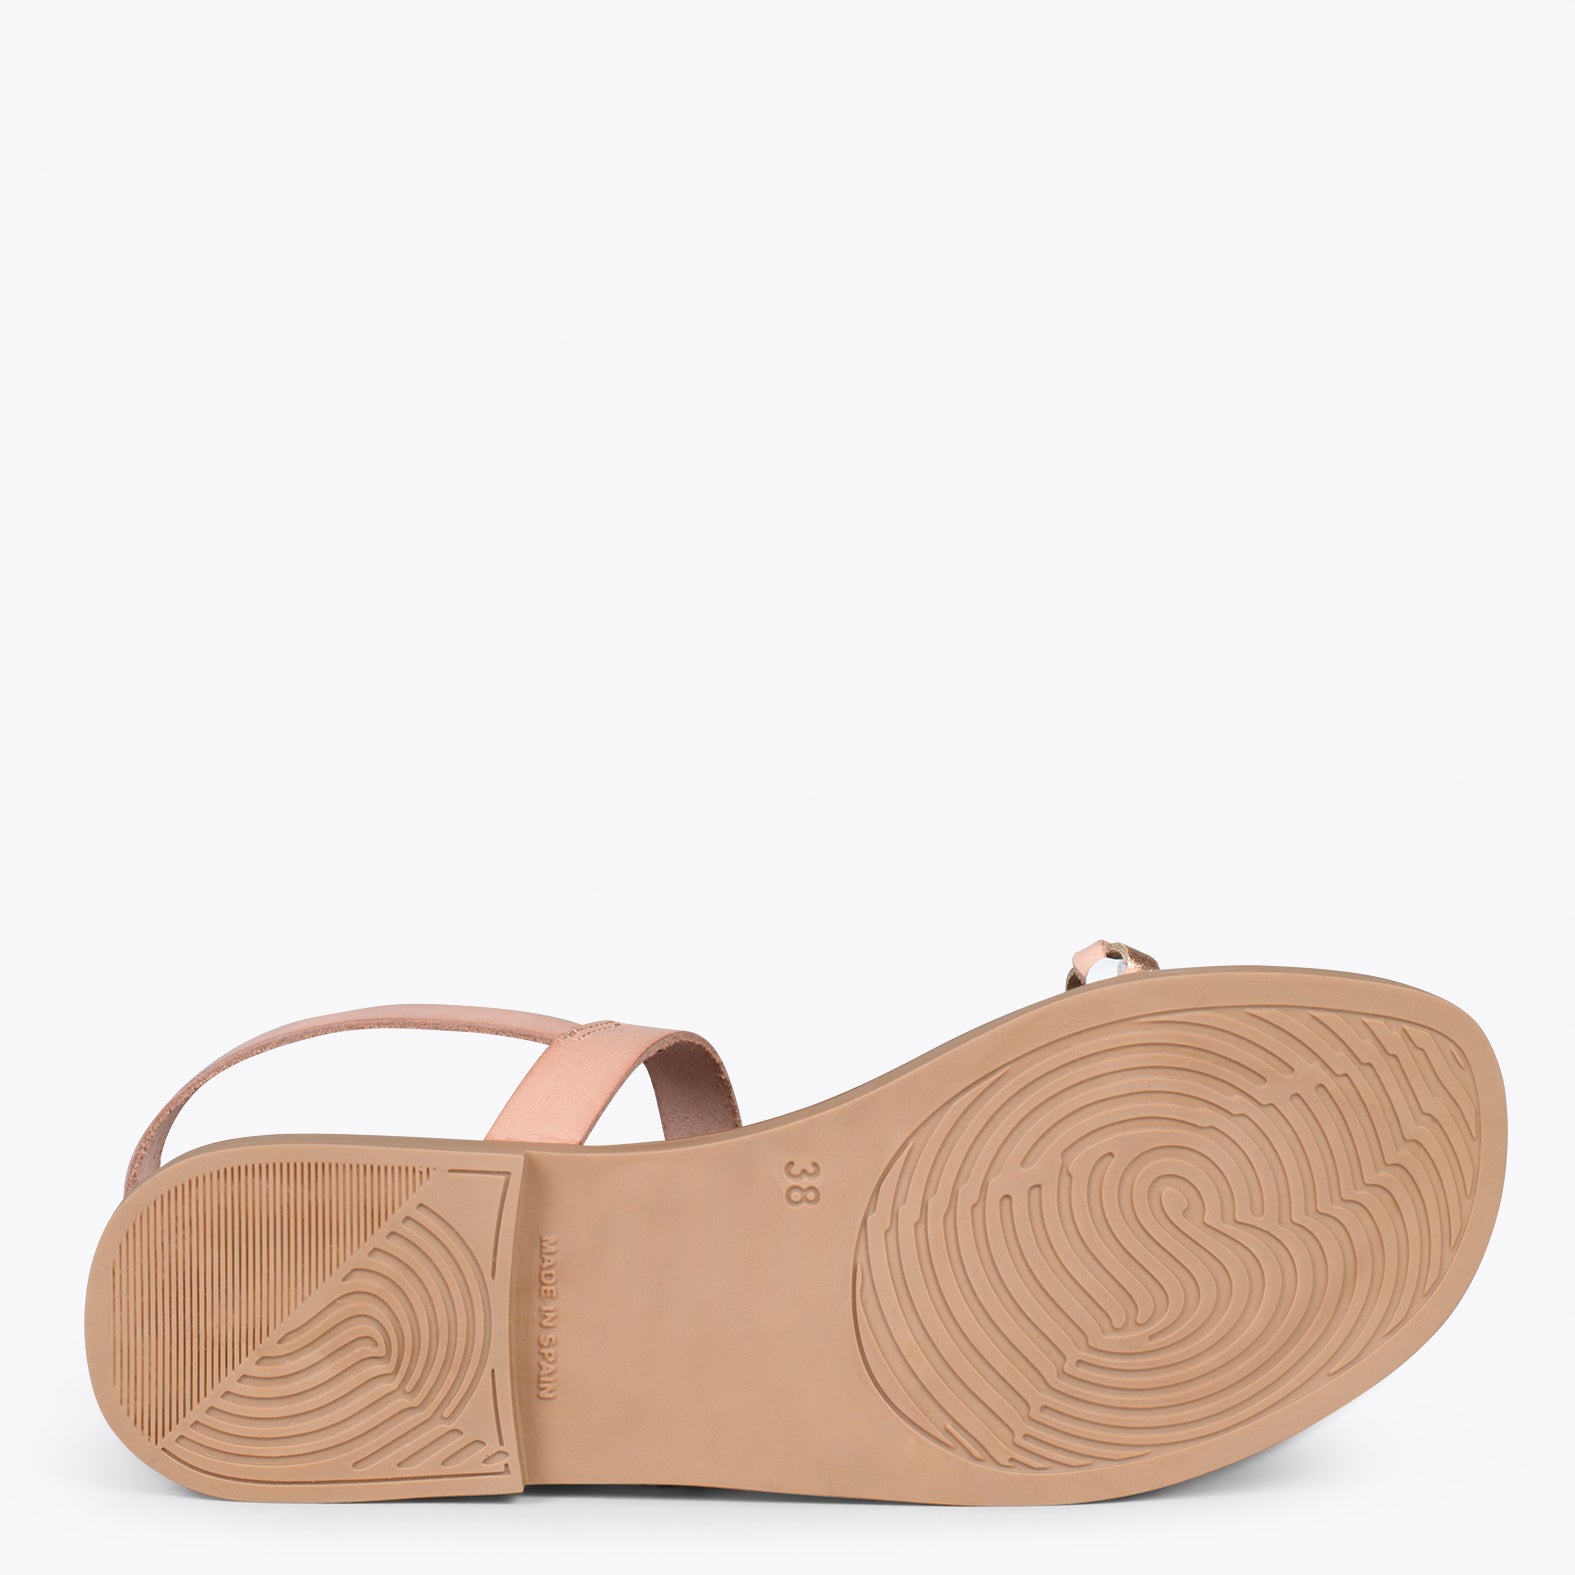 ASTER – NUDE flat sandals with buckle